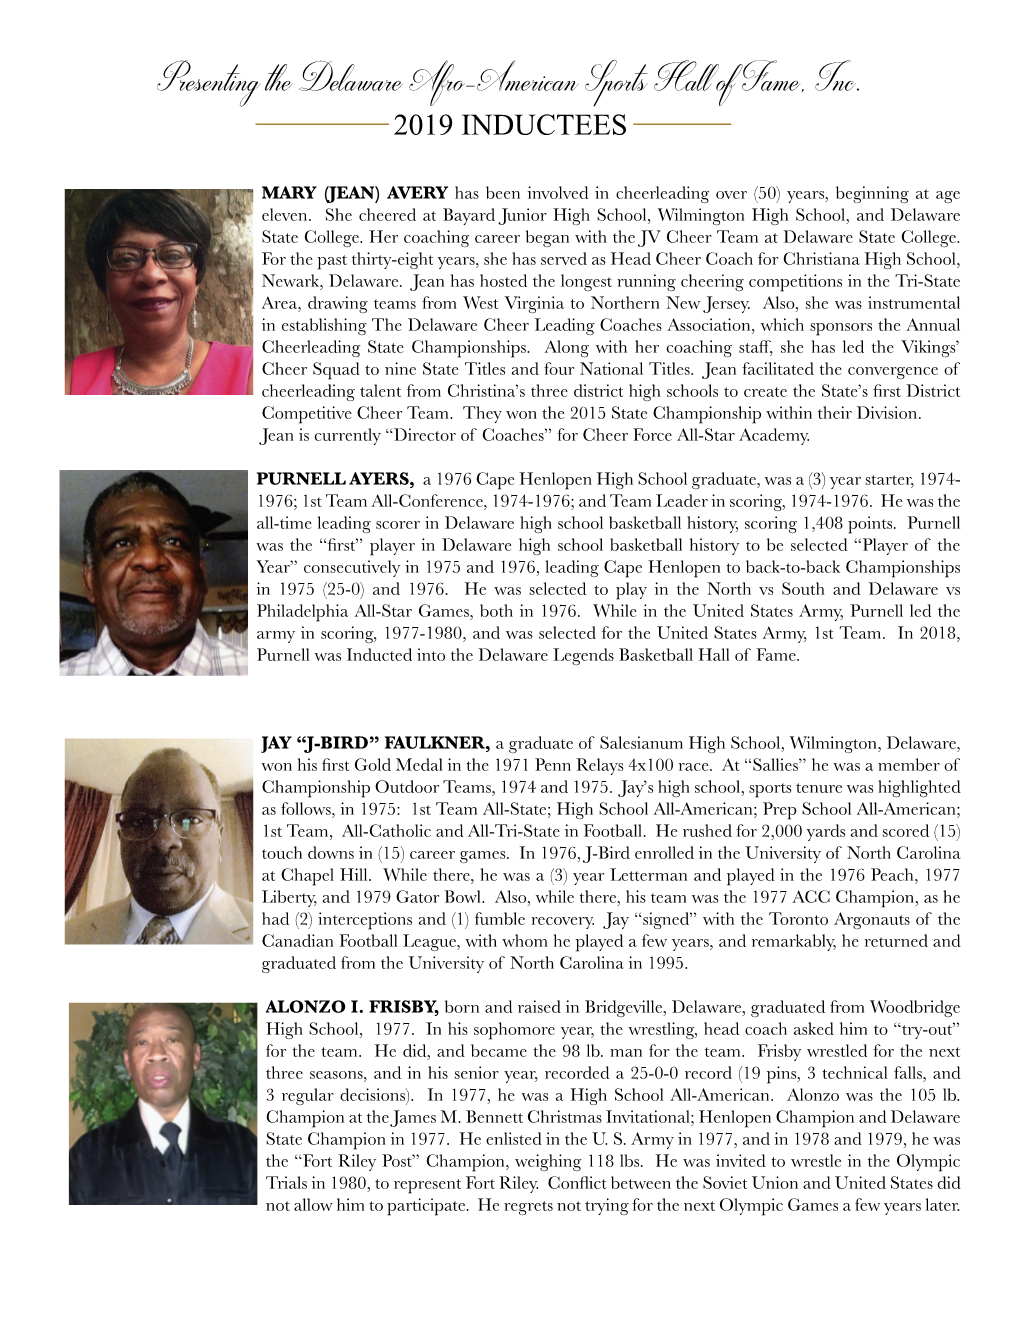 Presenting the Delaware Afro-American Sports Hall of Fame, Inc. 2019 INDUCTEES